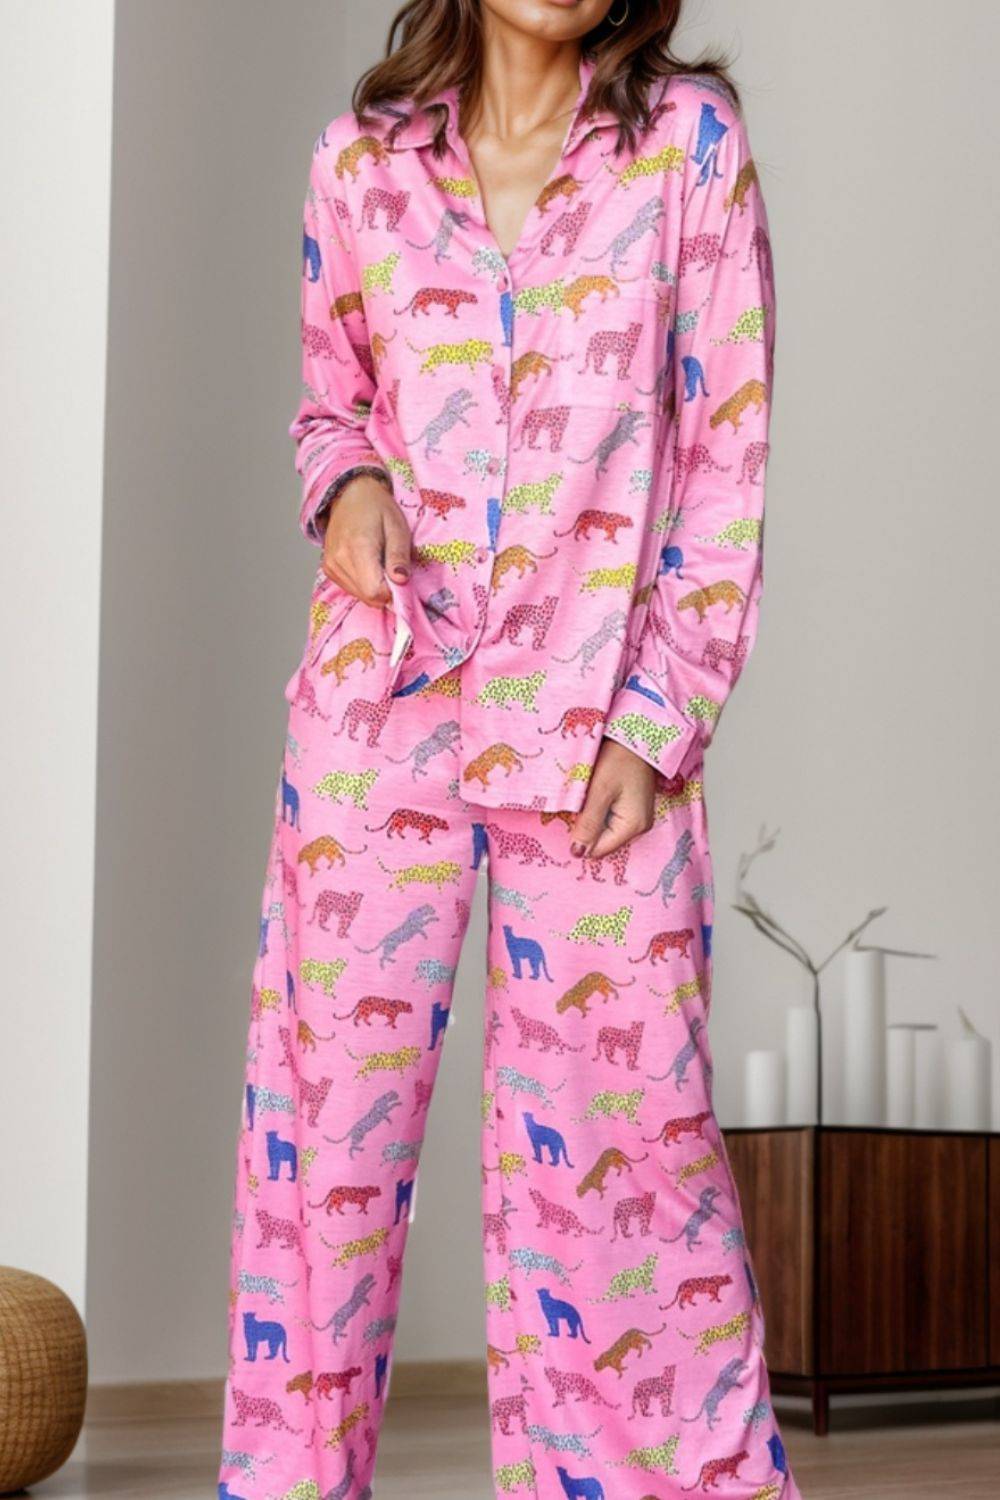 a woman wearing a pink pajamasuit with horses on it